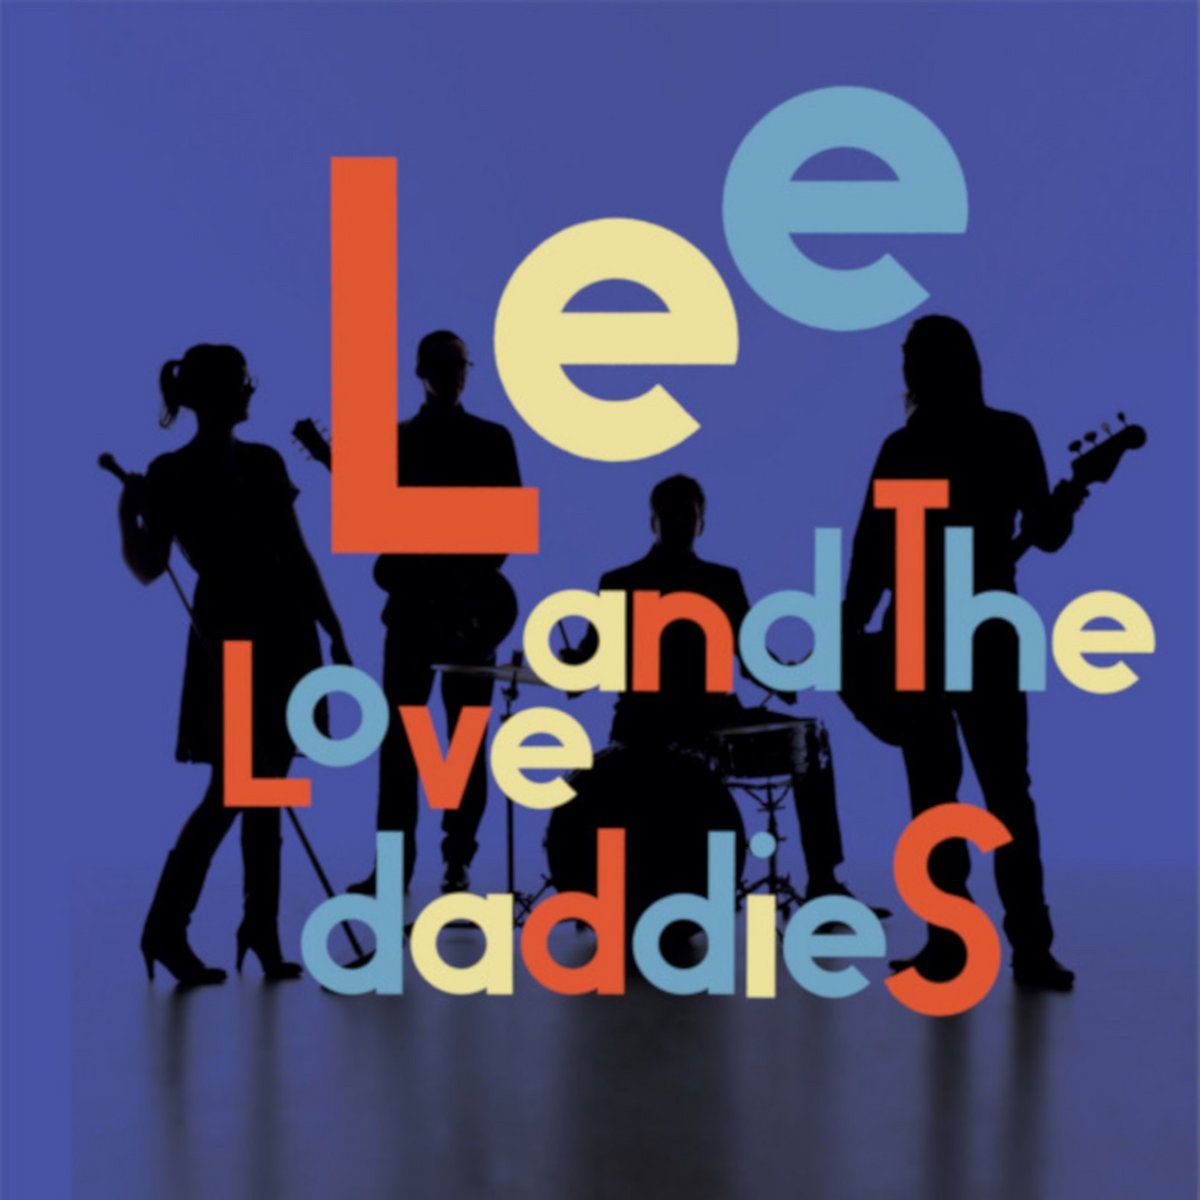 Lee And The Lovedaddies - Lee And The Lovedaddies front cover